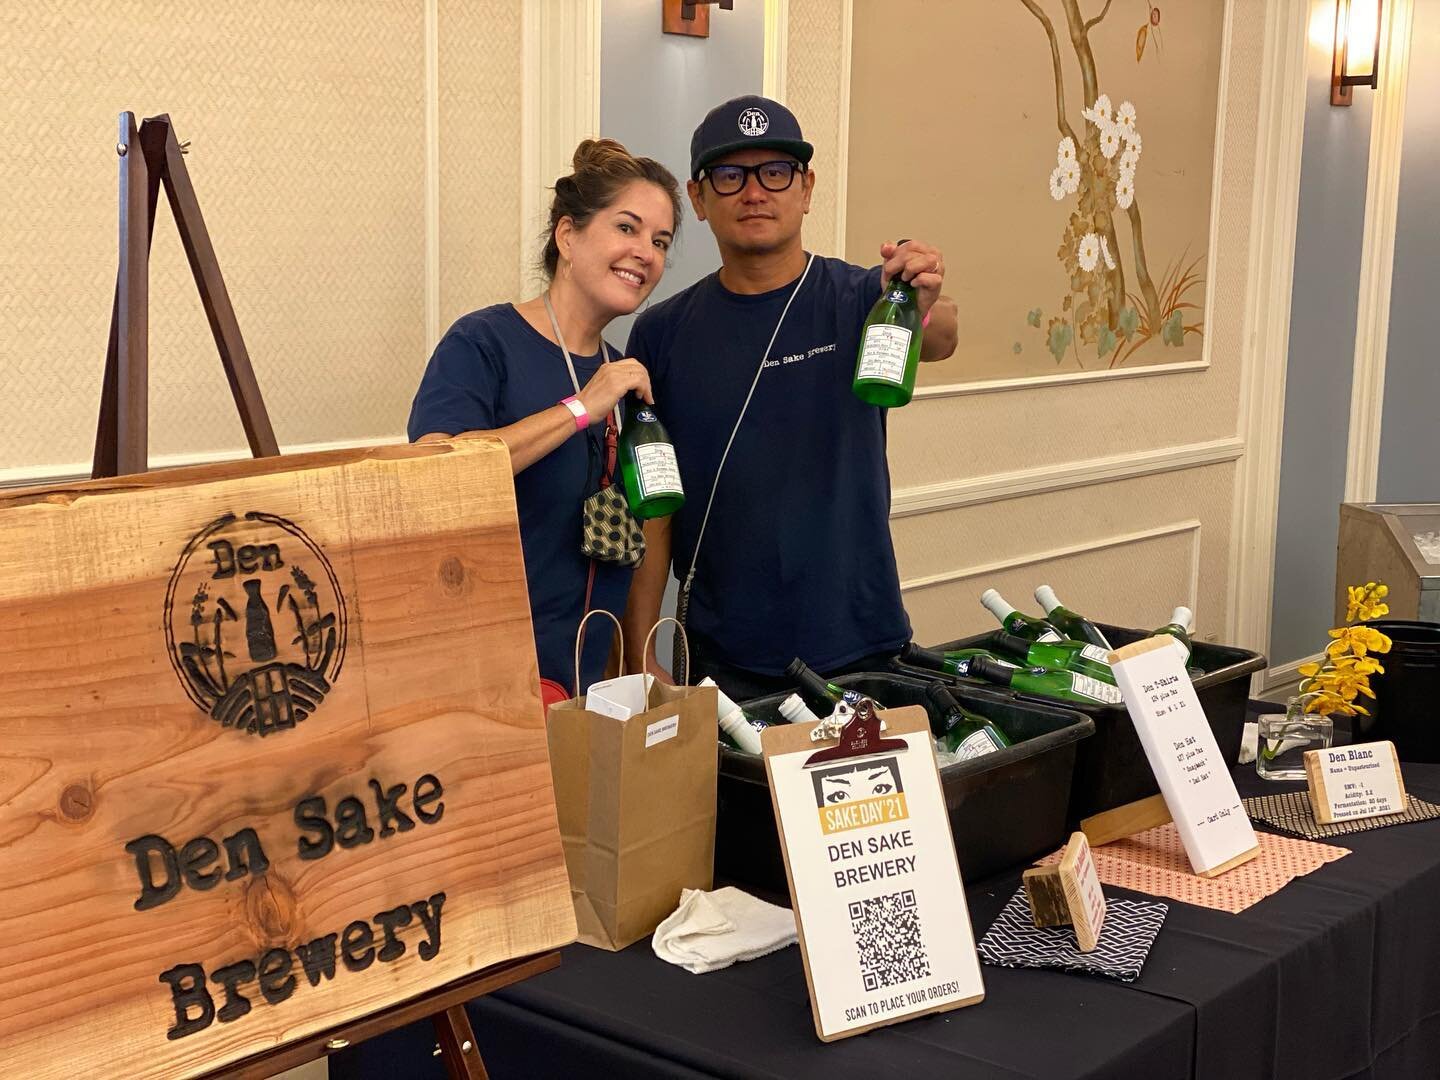 🗣🍶❤️ One of the most popular tables at SAKE DAY is always the @densakebrewery table with Lani and Yoshi Sako from Oakland's Den Sake Brewery. 🌾🌞

These two used to attend SAKE DAY as guests before they opened their brewery, so they know the tasti